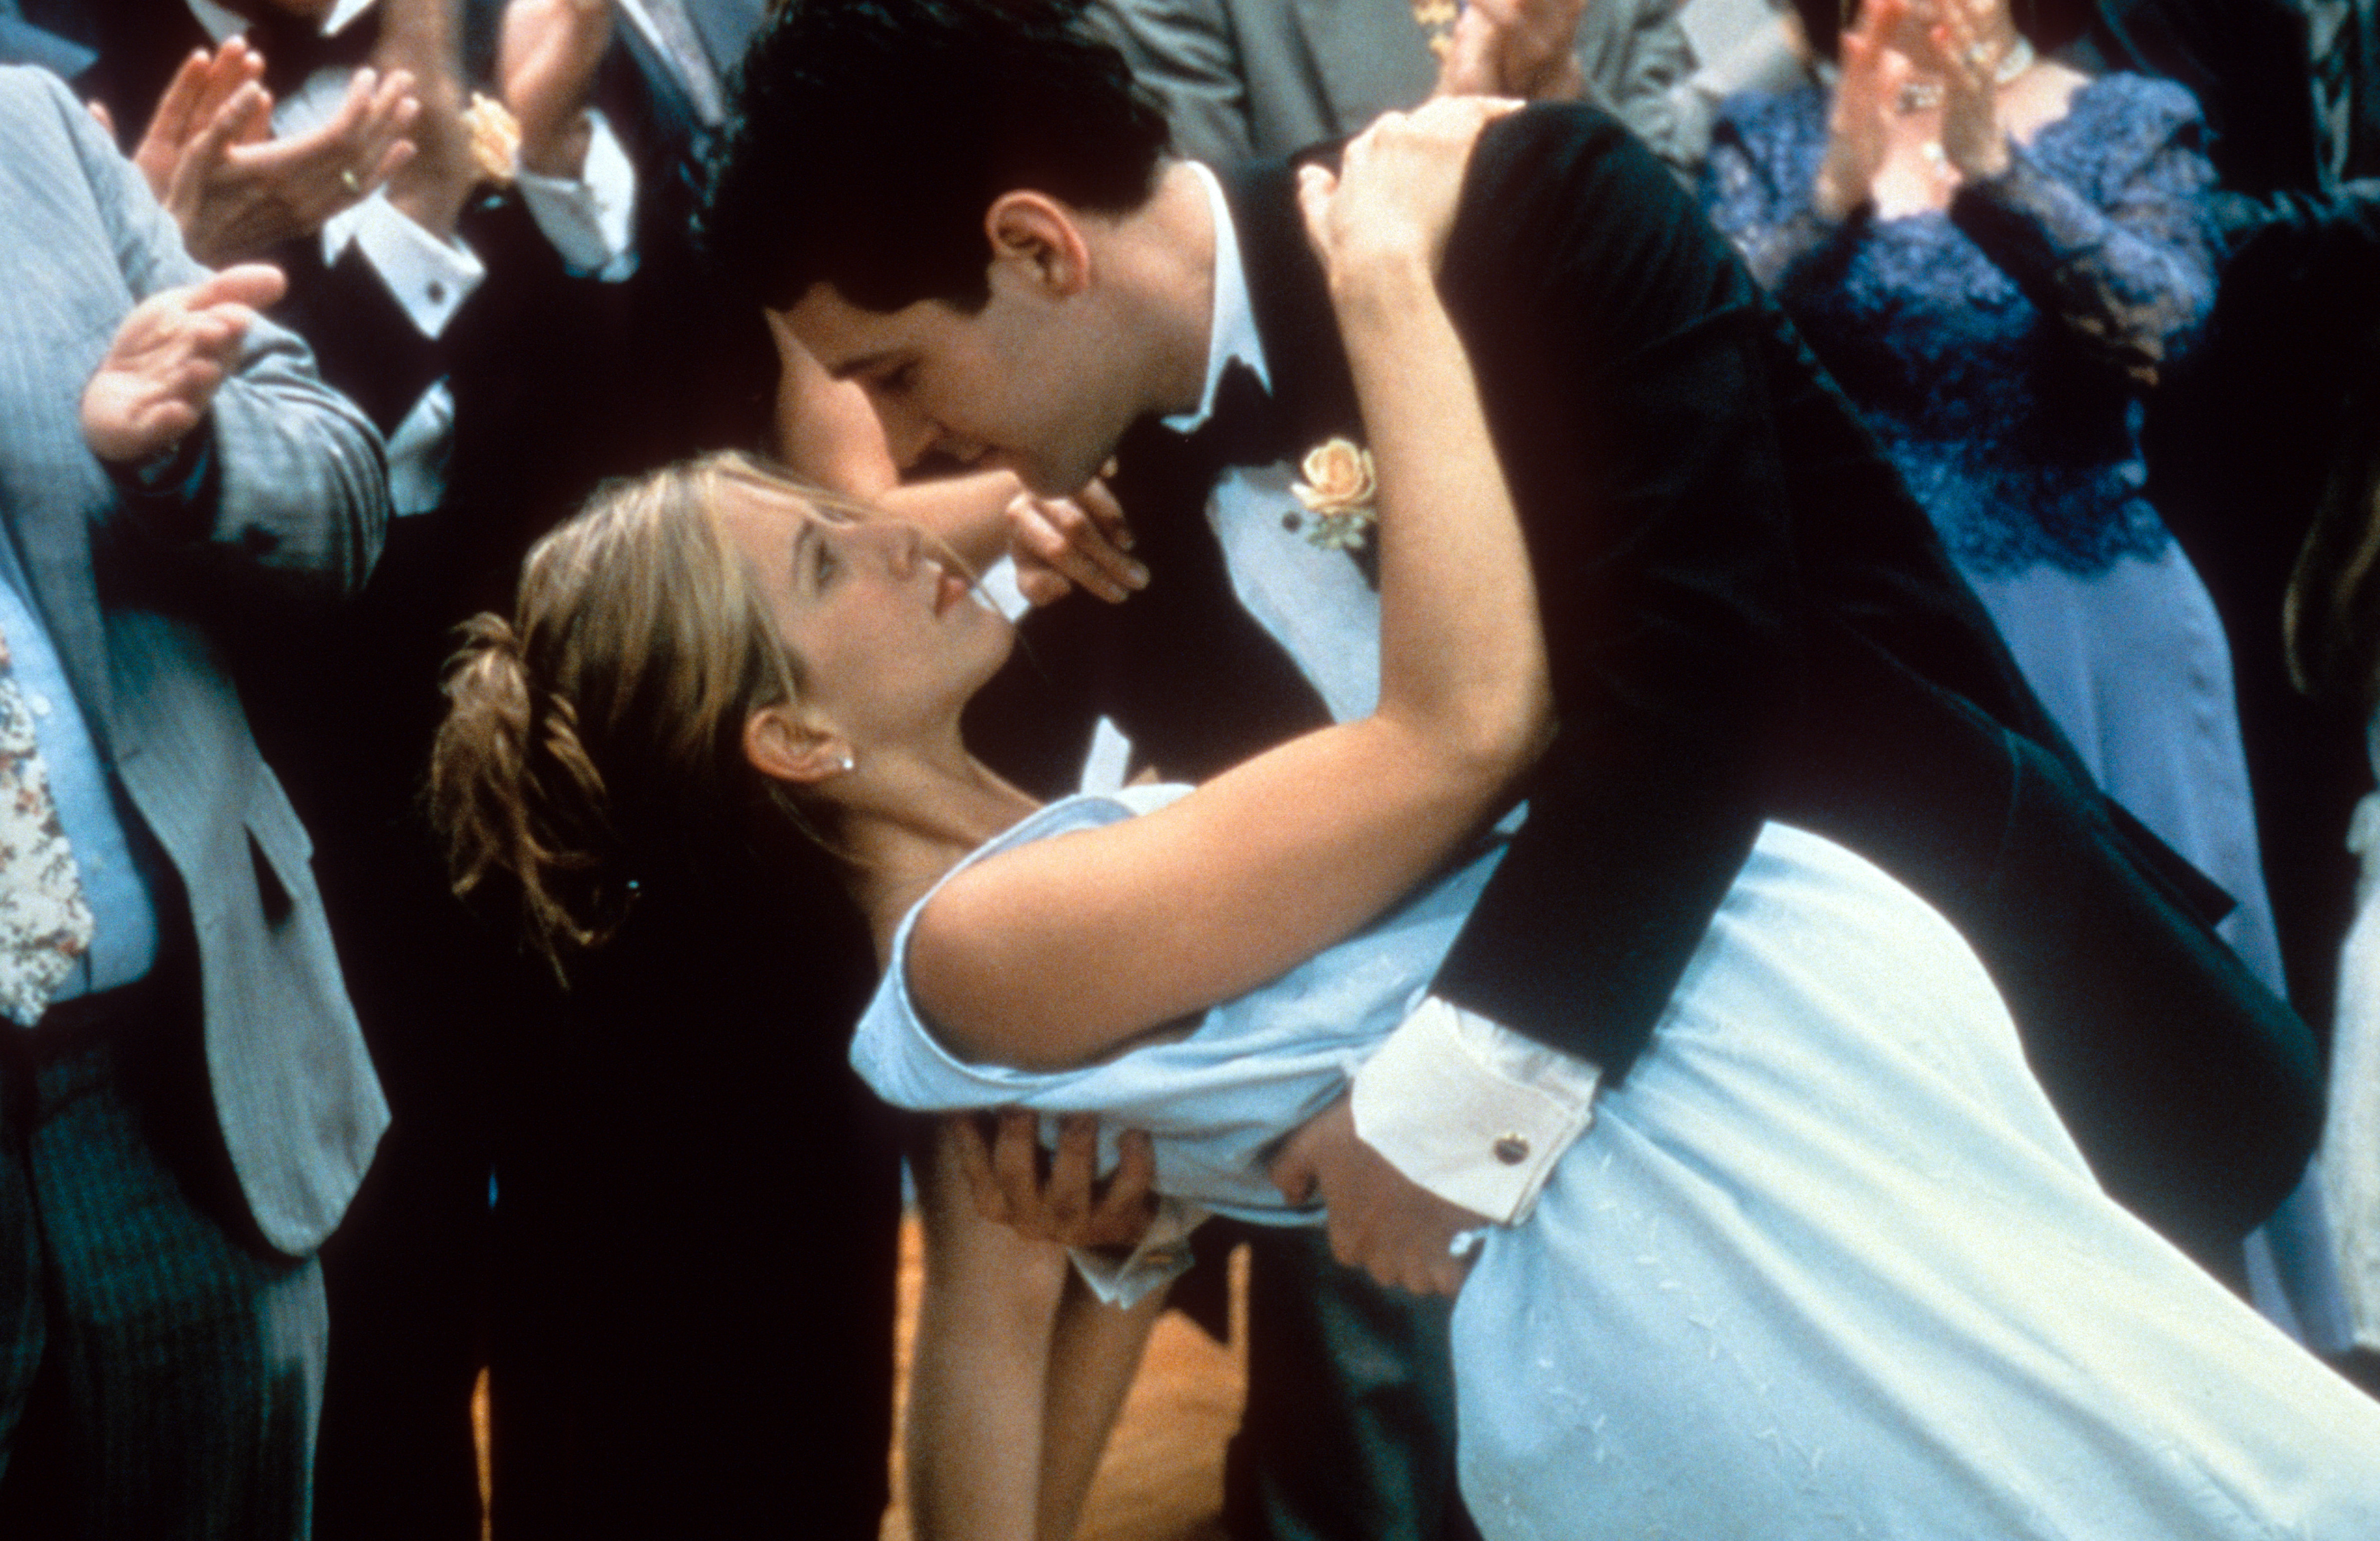 Jennifer Aniston and Paul Rudd on the set of "The Object Of My Affection," in 1998 | Source: Getty Images